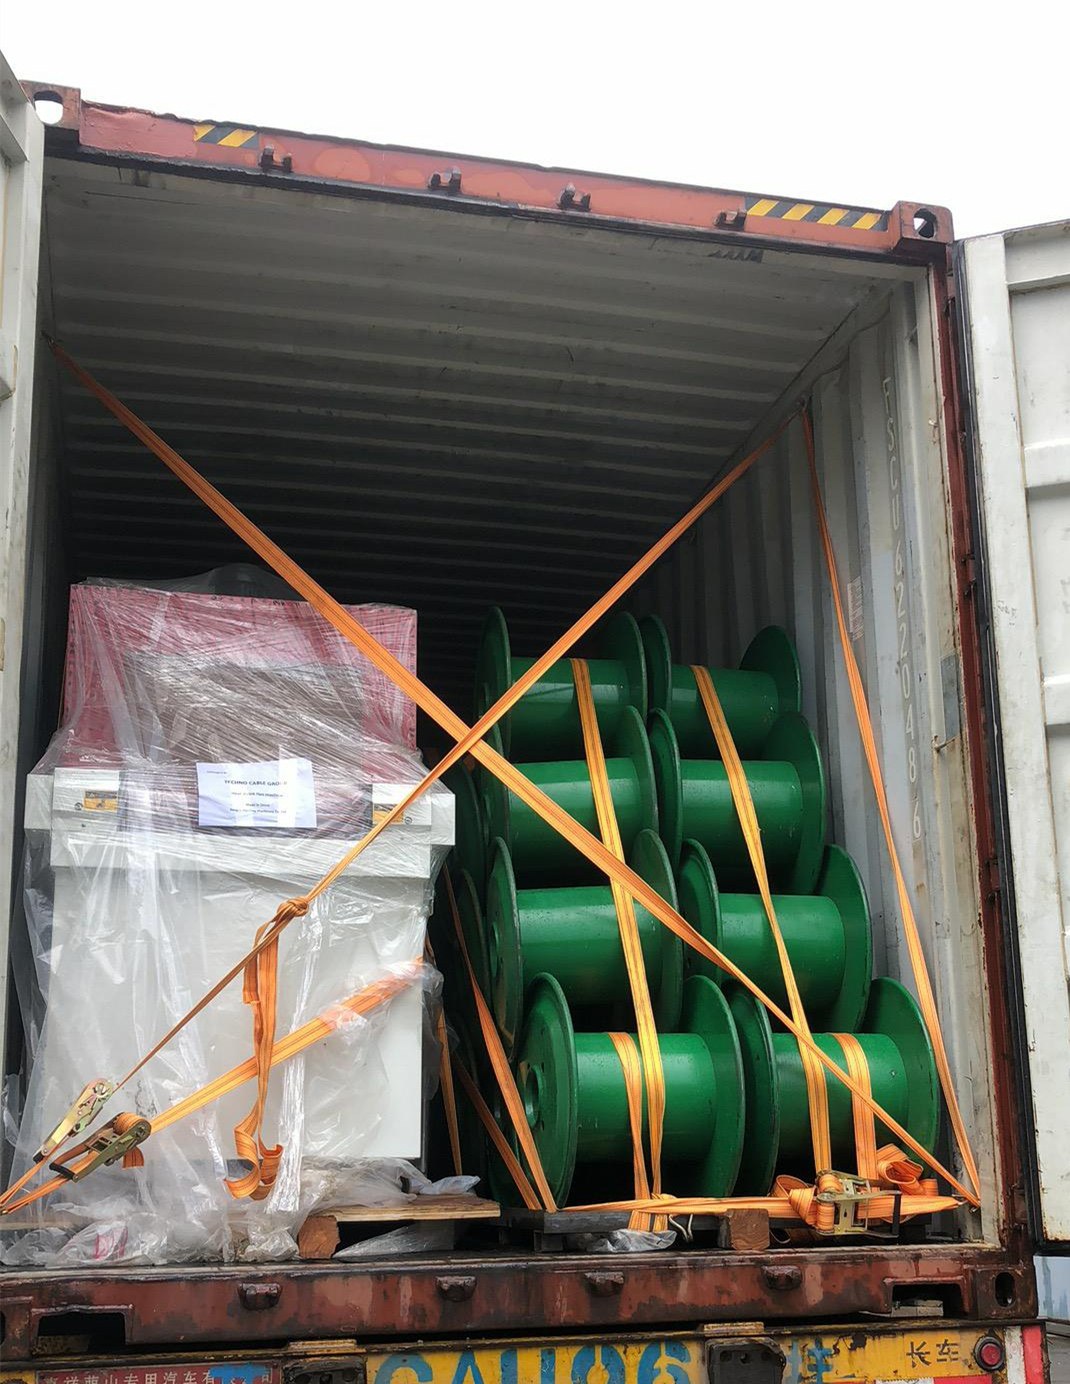 Coiling machine delivered to Tashkent